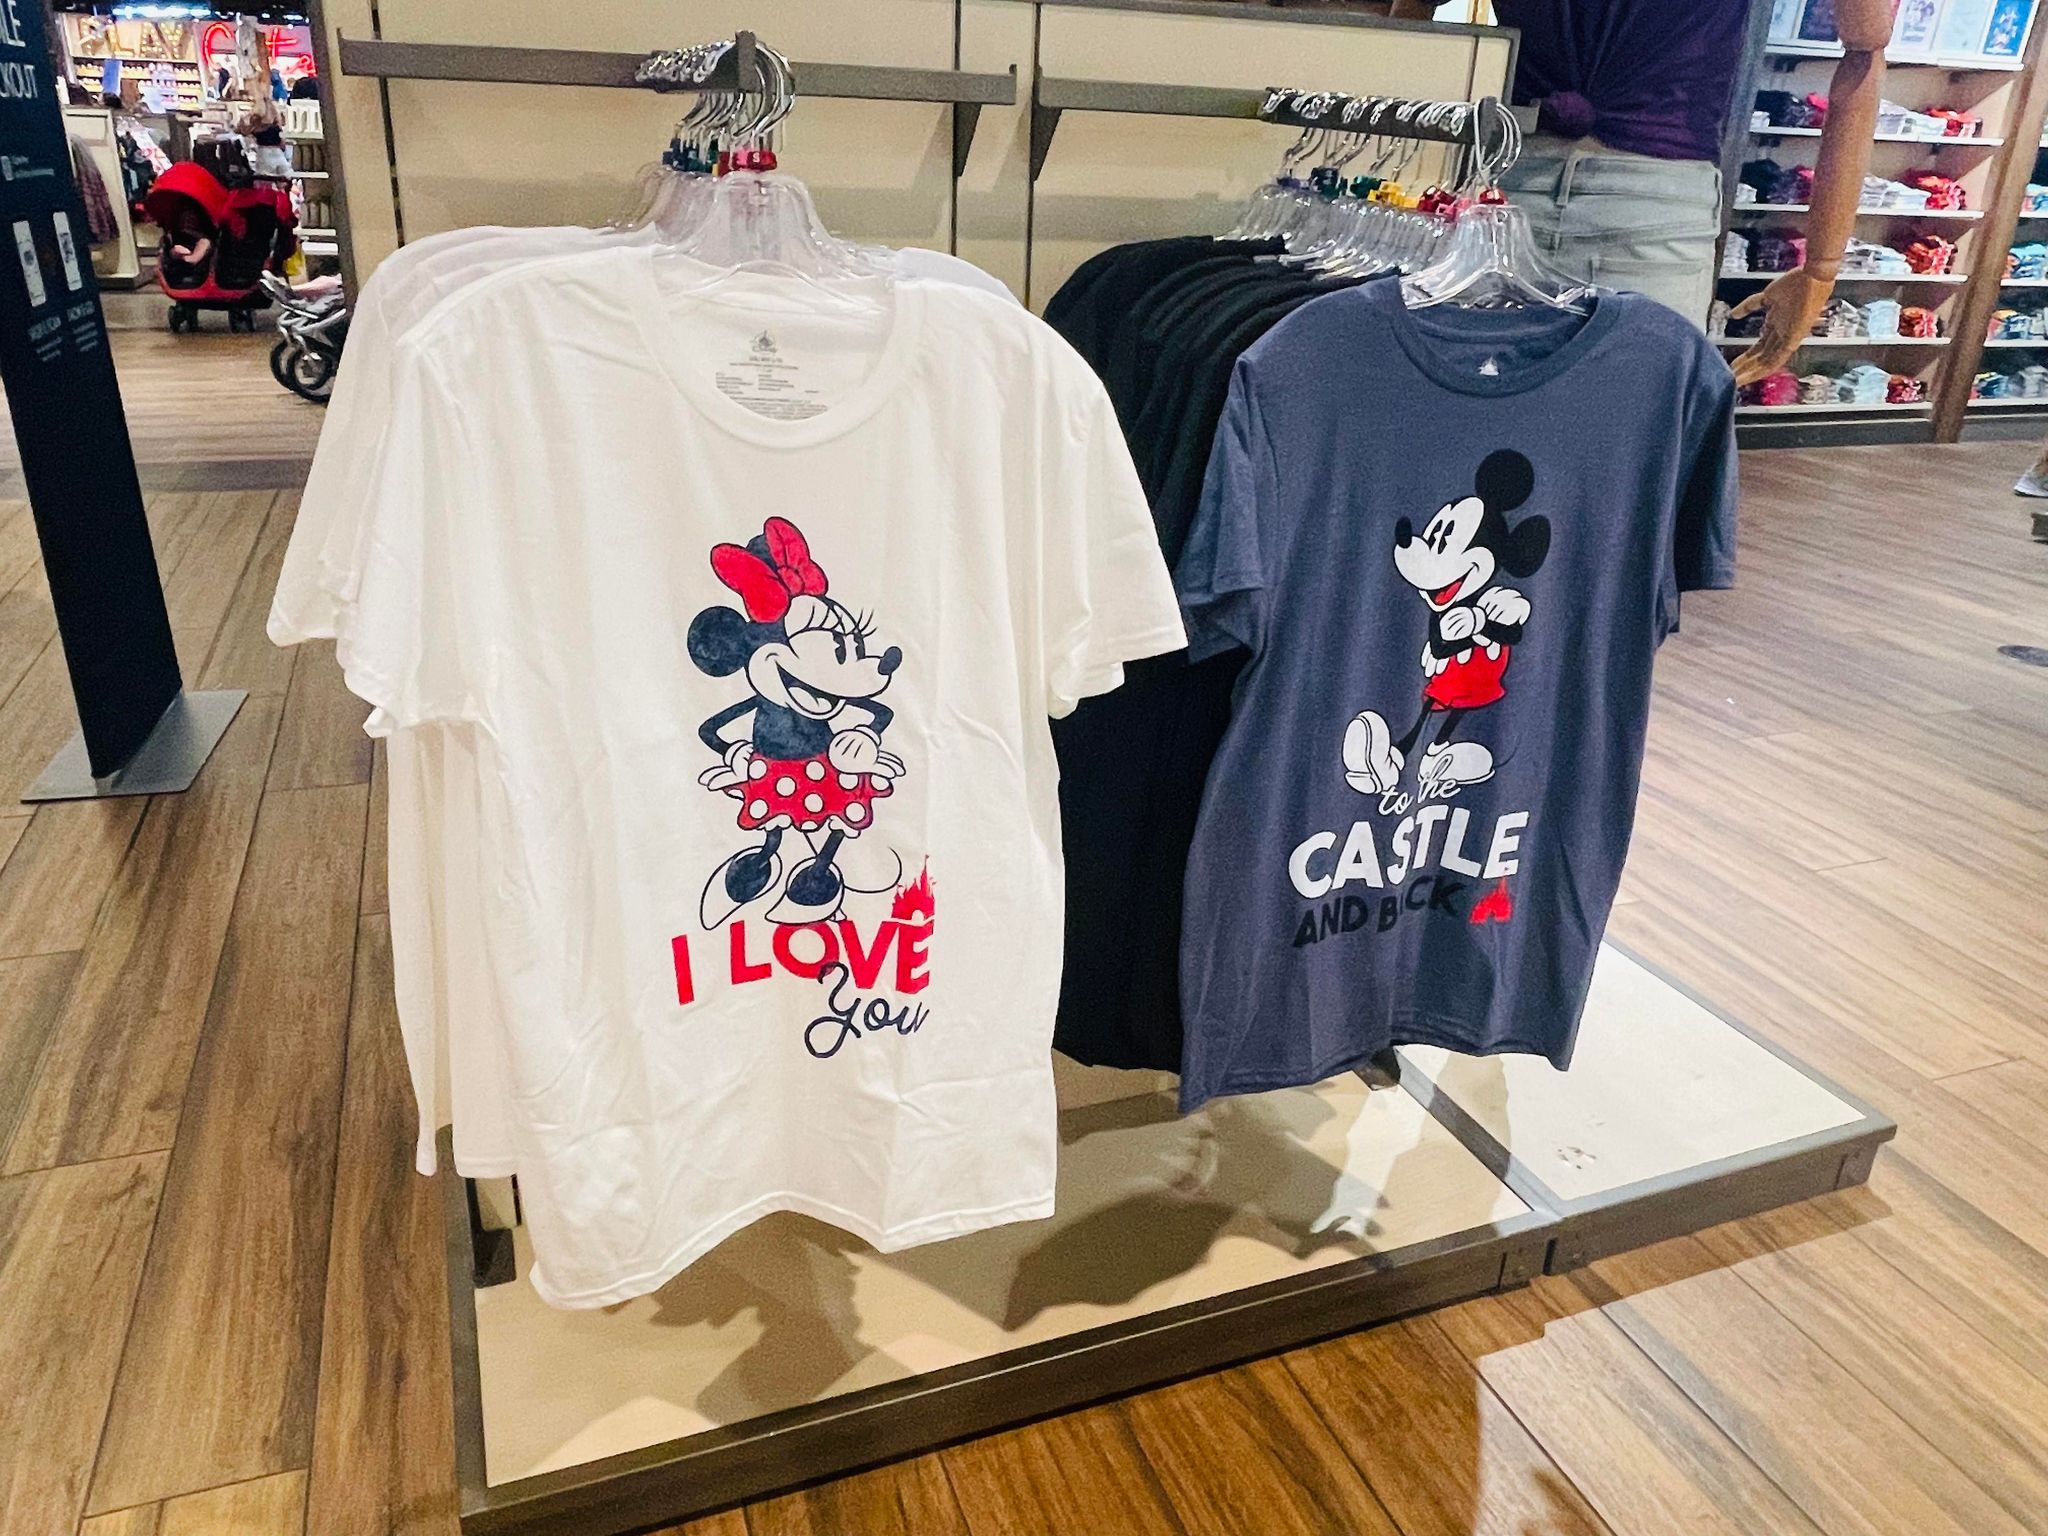 The Cutest New Couples T Shirts Have Just Arrived At Disney Springs Mickeyblog Com